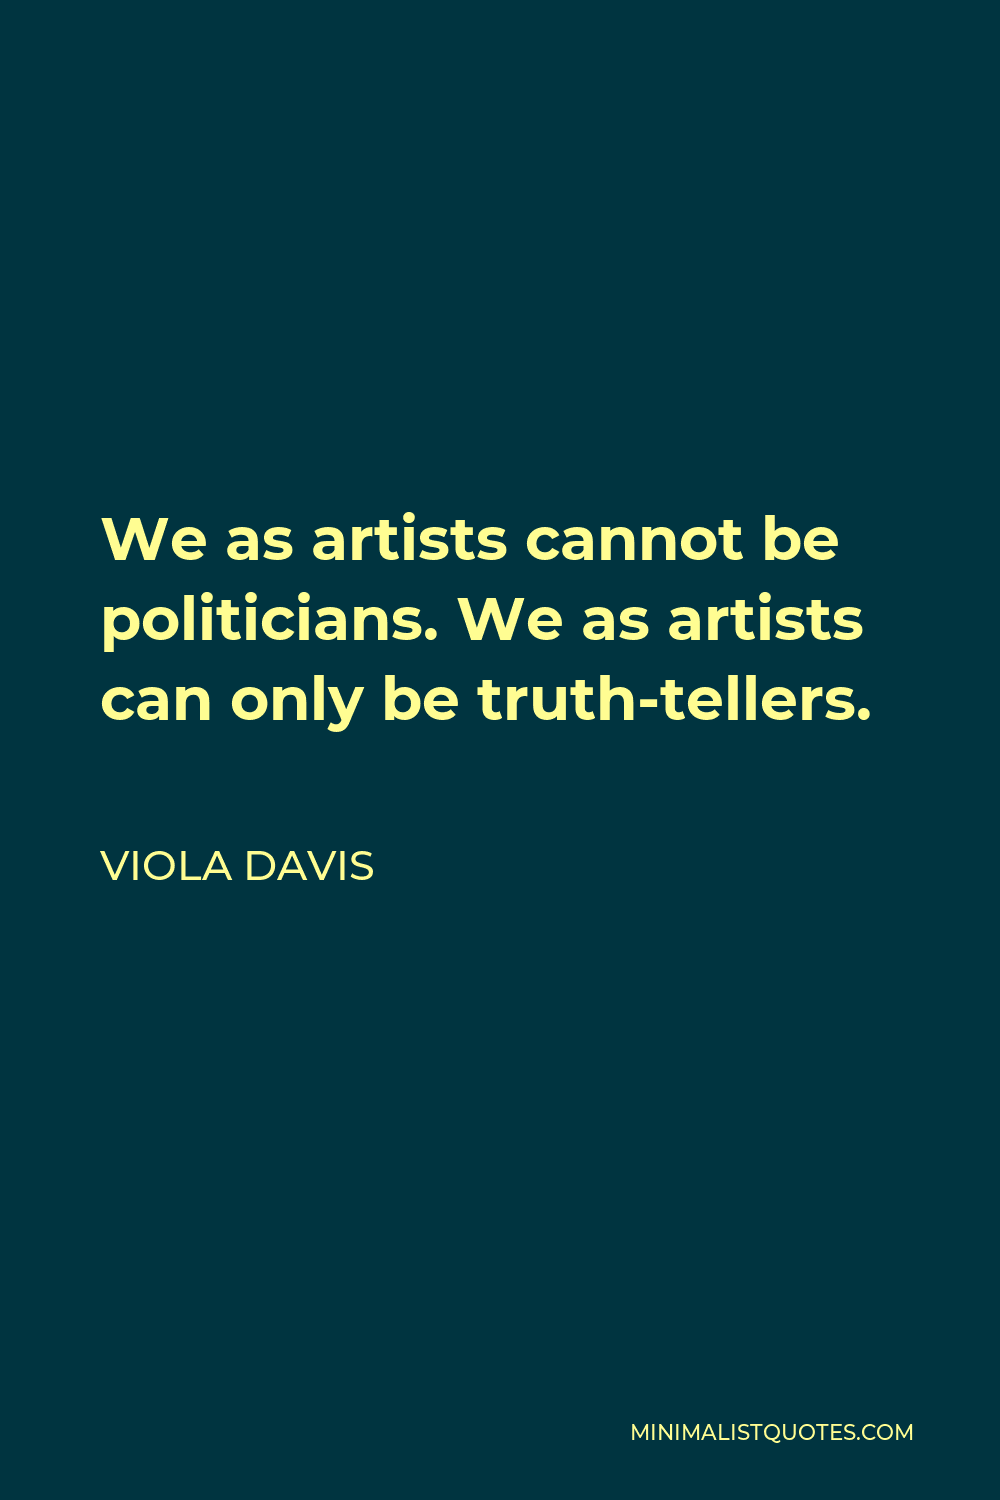 Viola Davis Quote - We as artists cannot be politicians. We as artists can only be truth-tellers.